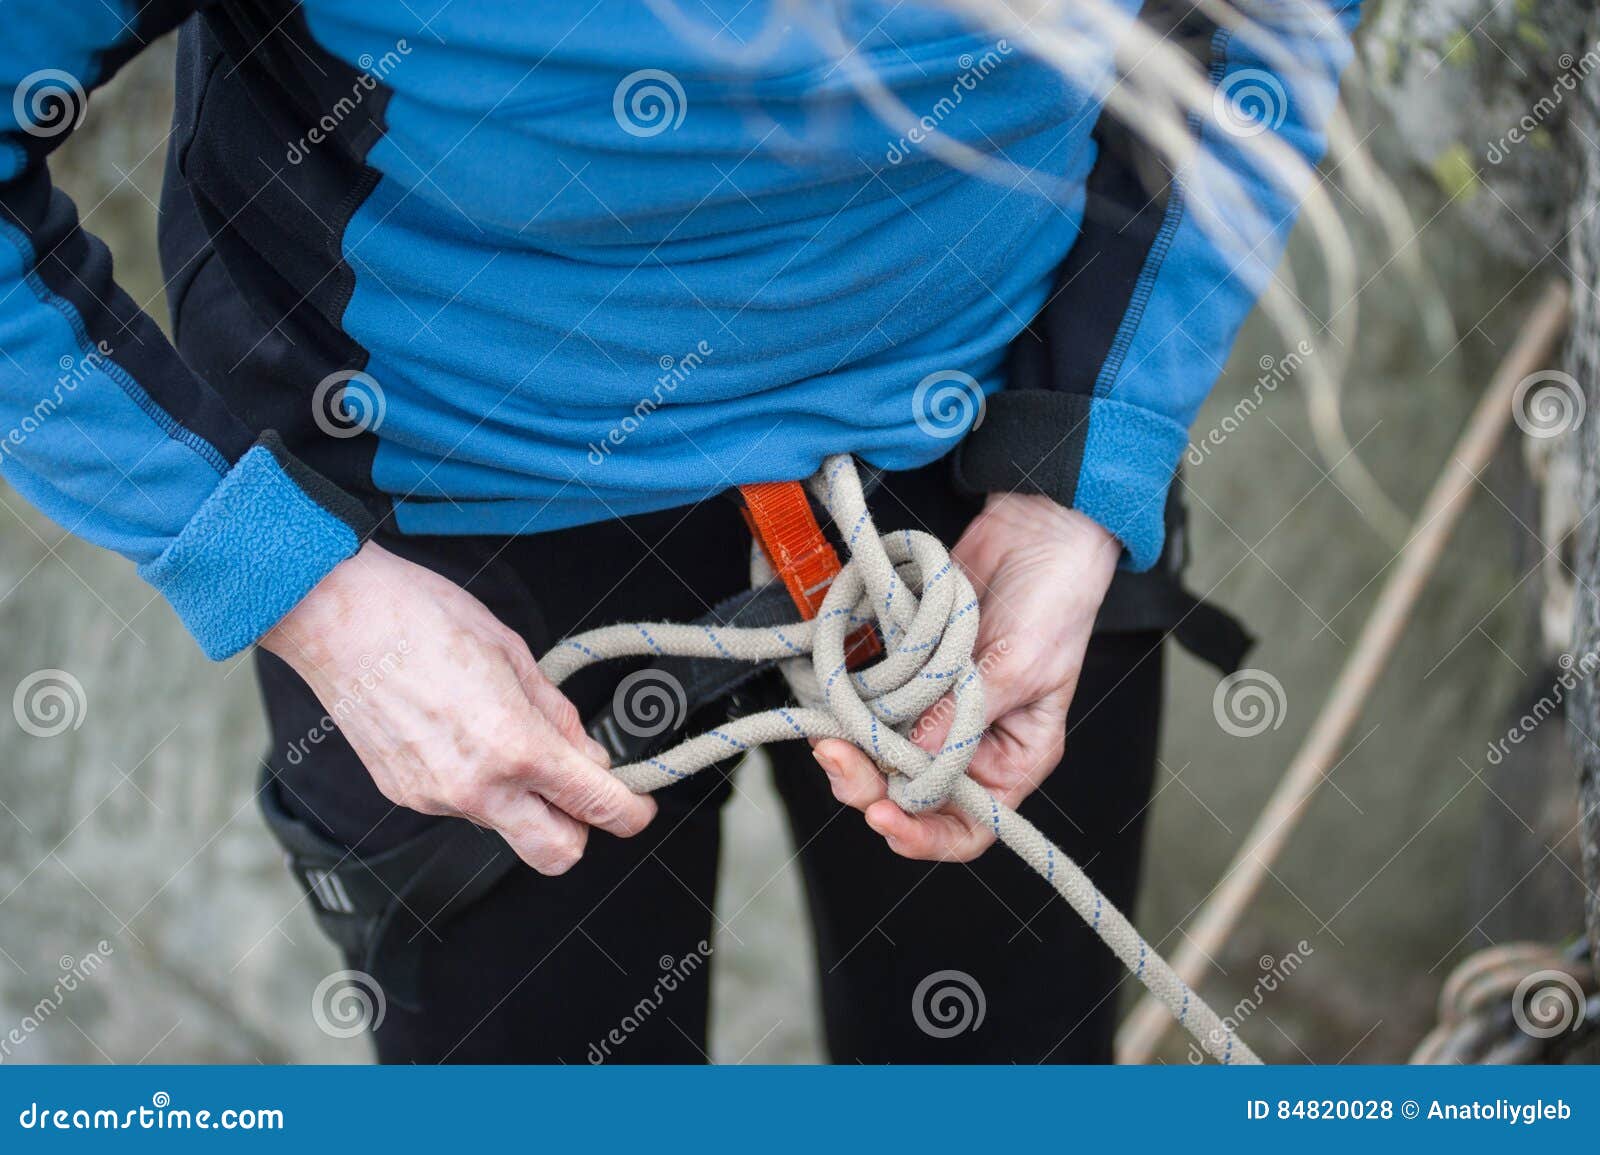 Climber Woman in Safety Harness Tying Rope in Bowline Knot Stock